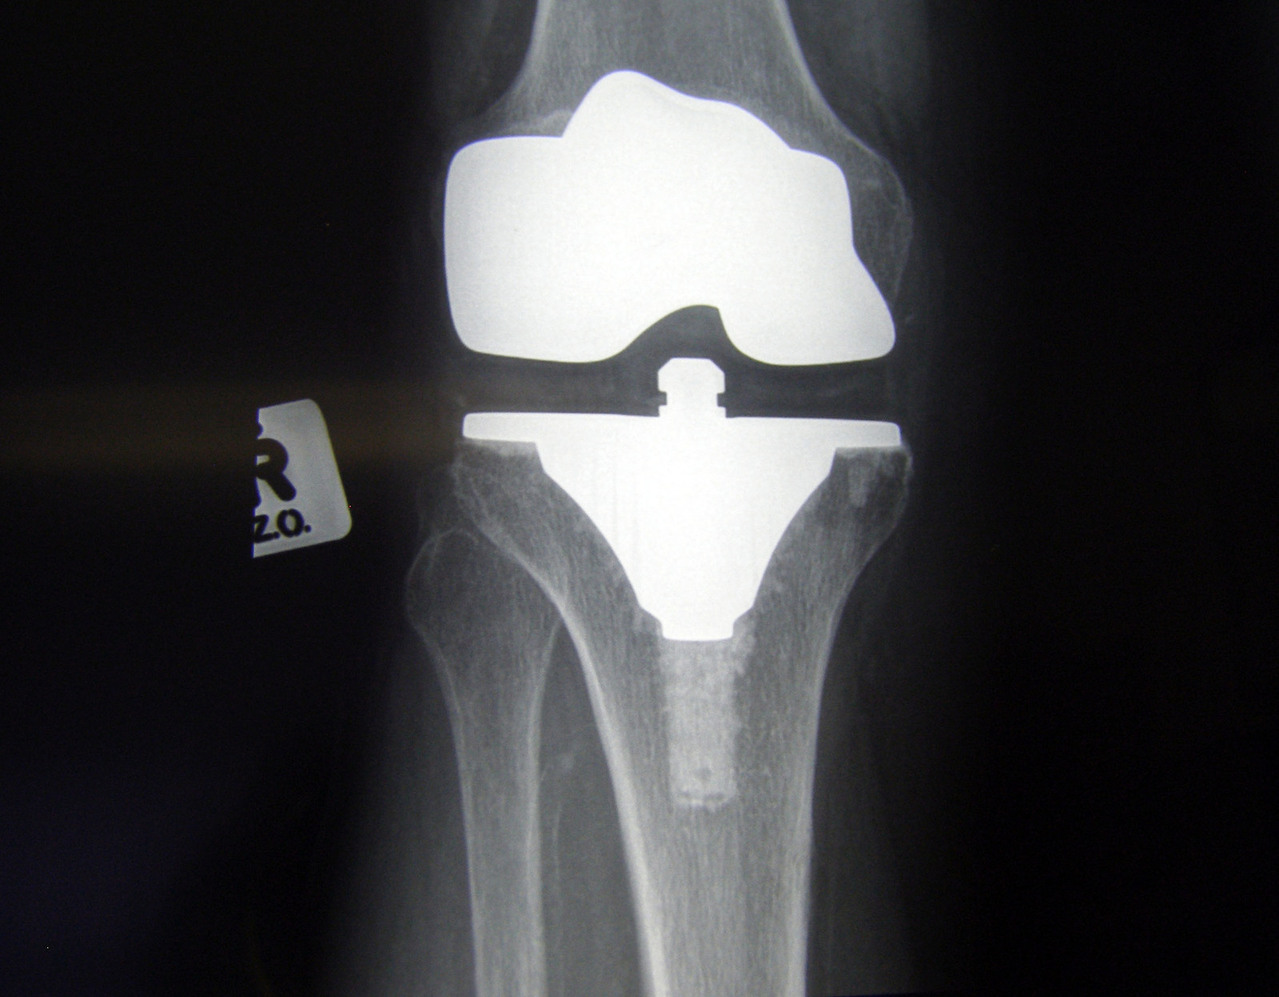 Knee replacement surgery is becoming more and more common as people are liv...